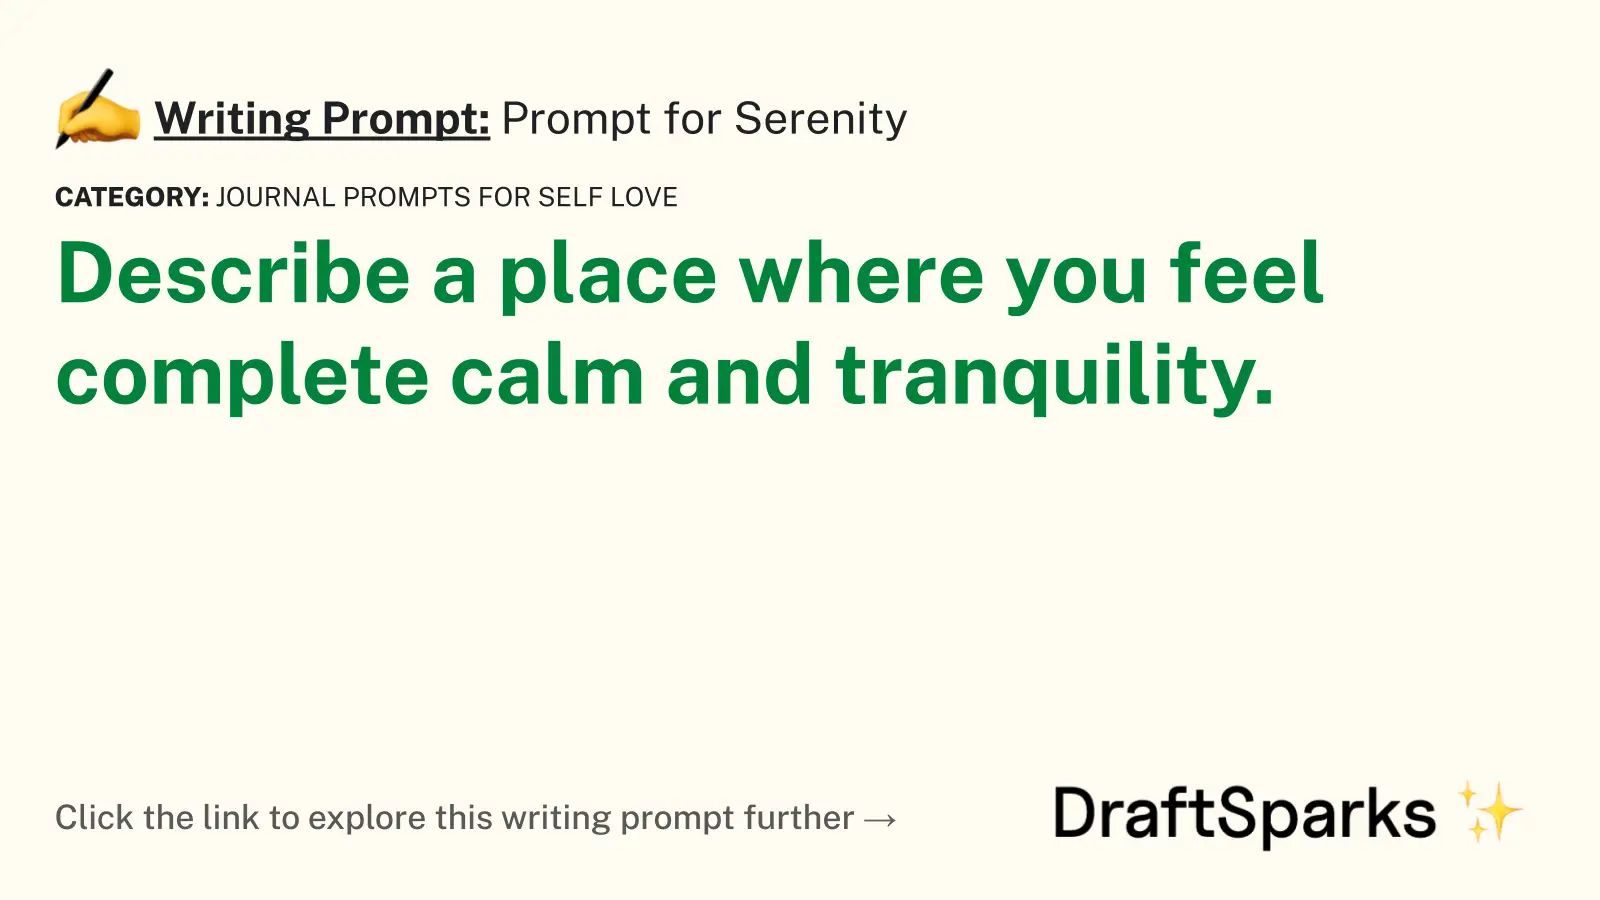 Prompt for Serenity